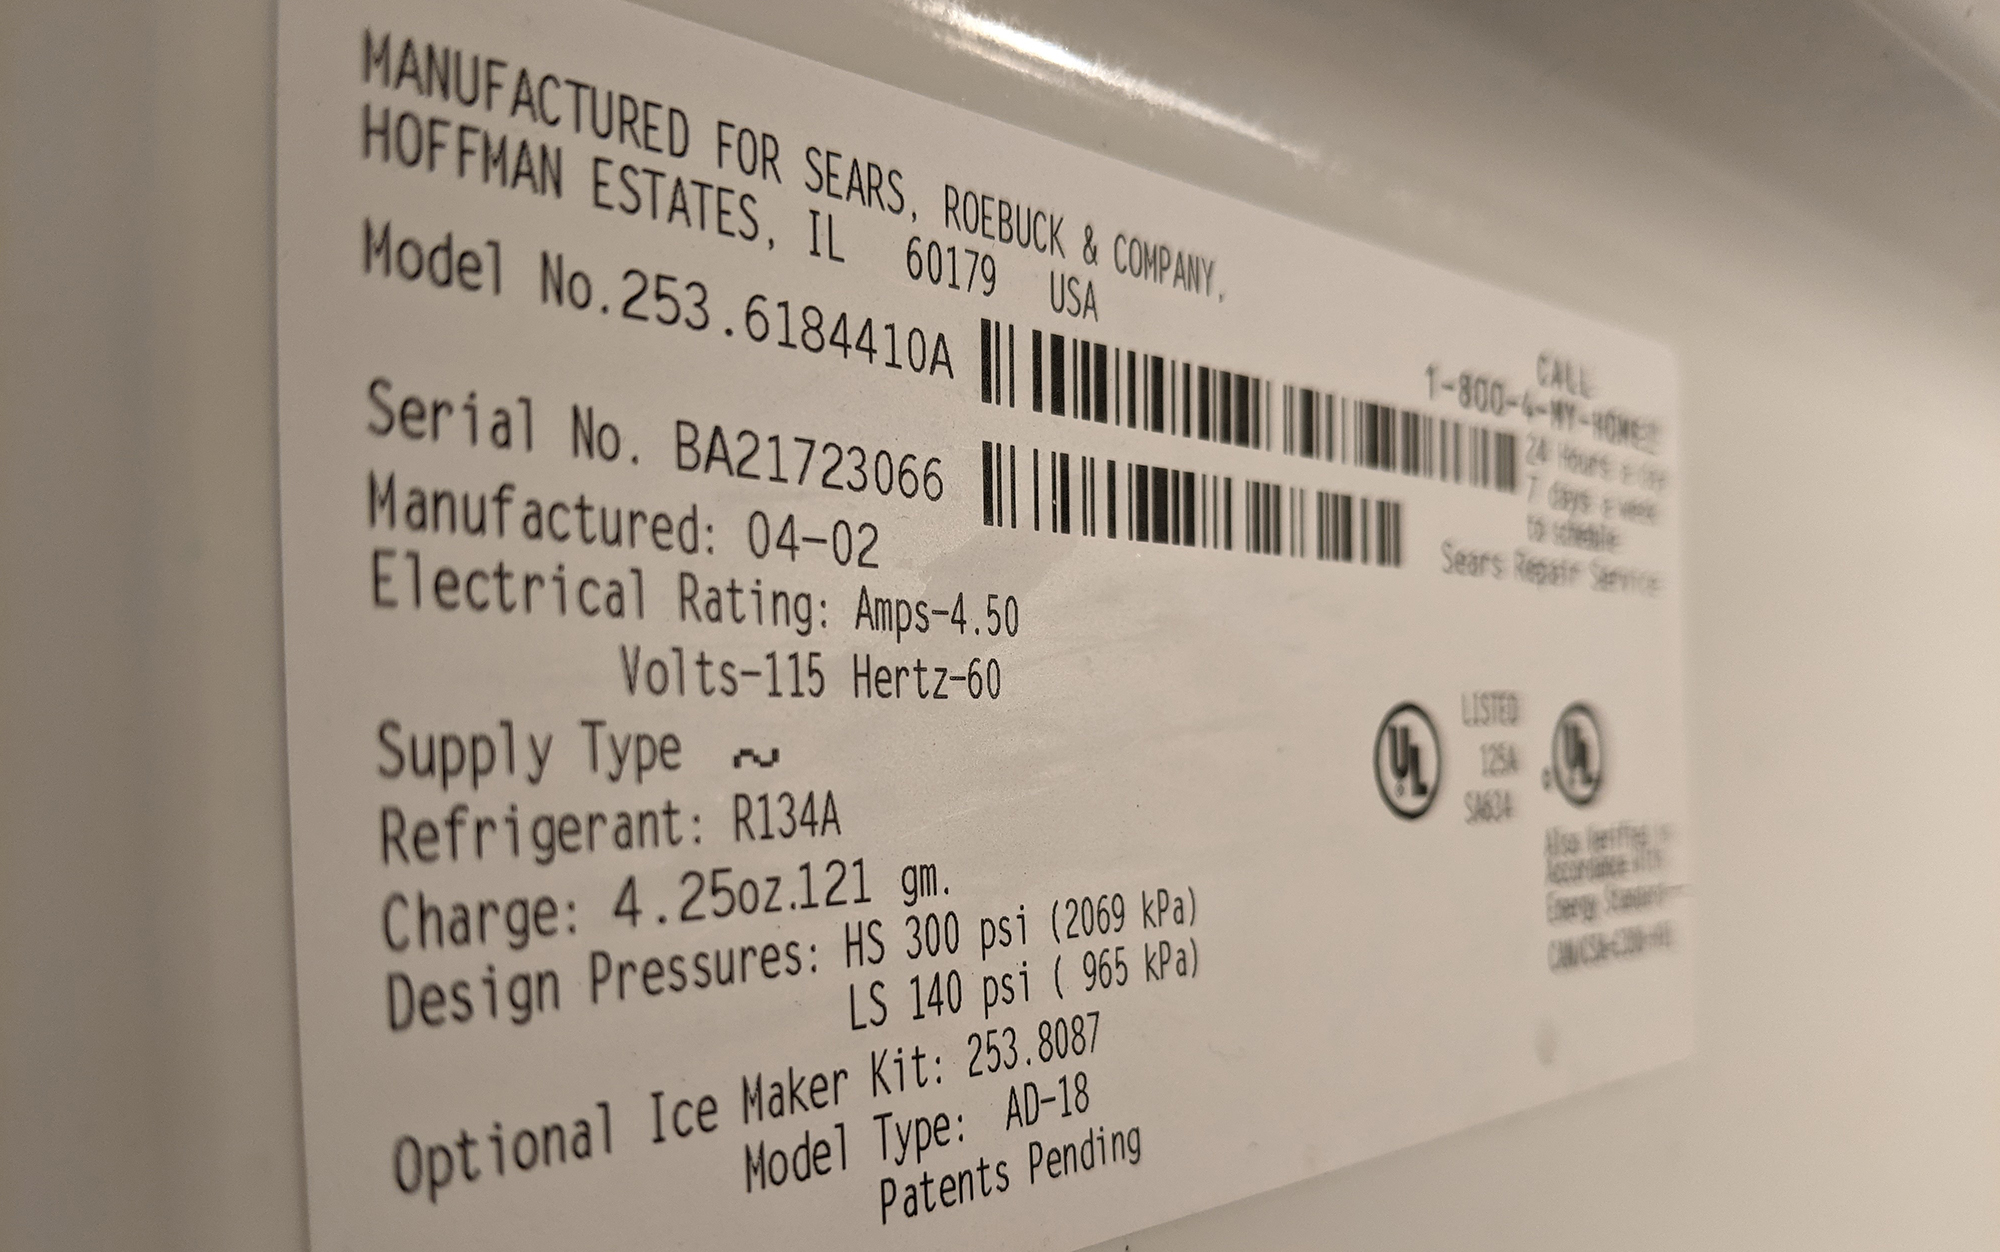 At 115 volts, I can use three out of the five of the power stations in my test to power my fridge. 